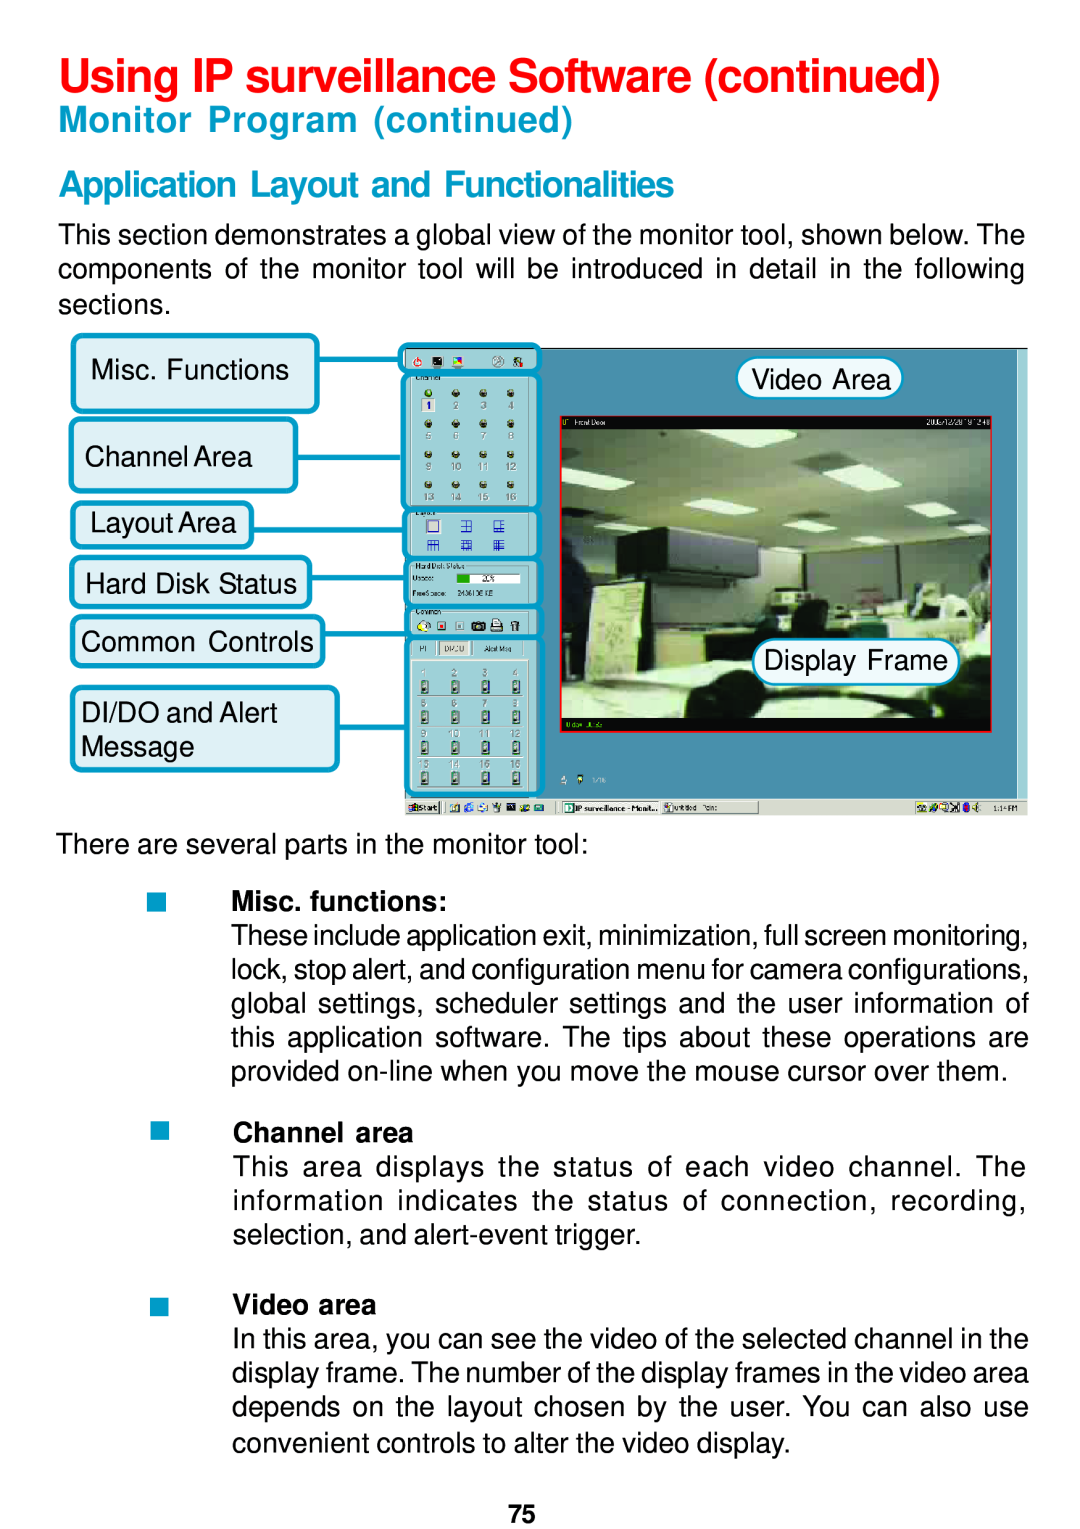 D-Link DCS-5300 Monitor Program continued Application Layout and Functionalities, Using IP surveillance Software continued 